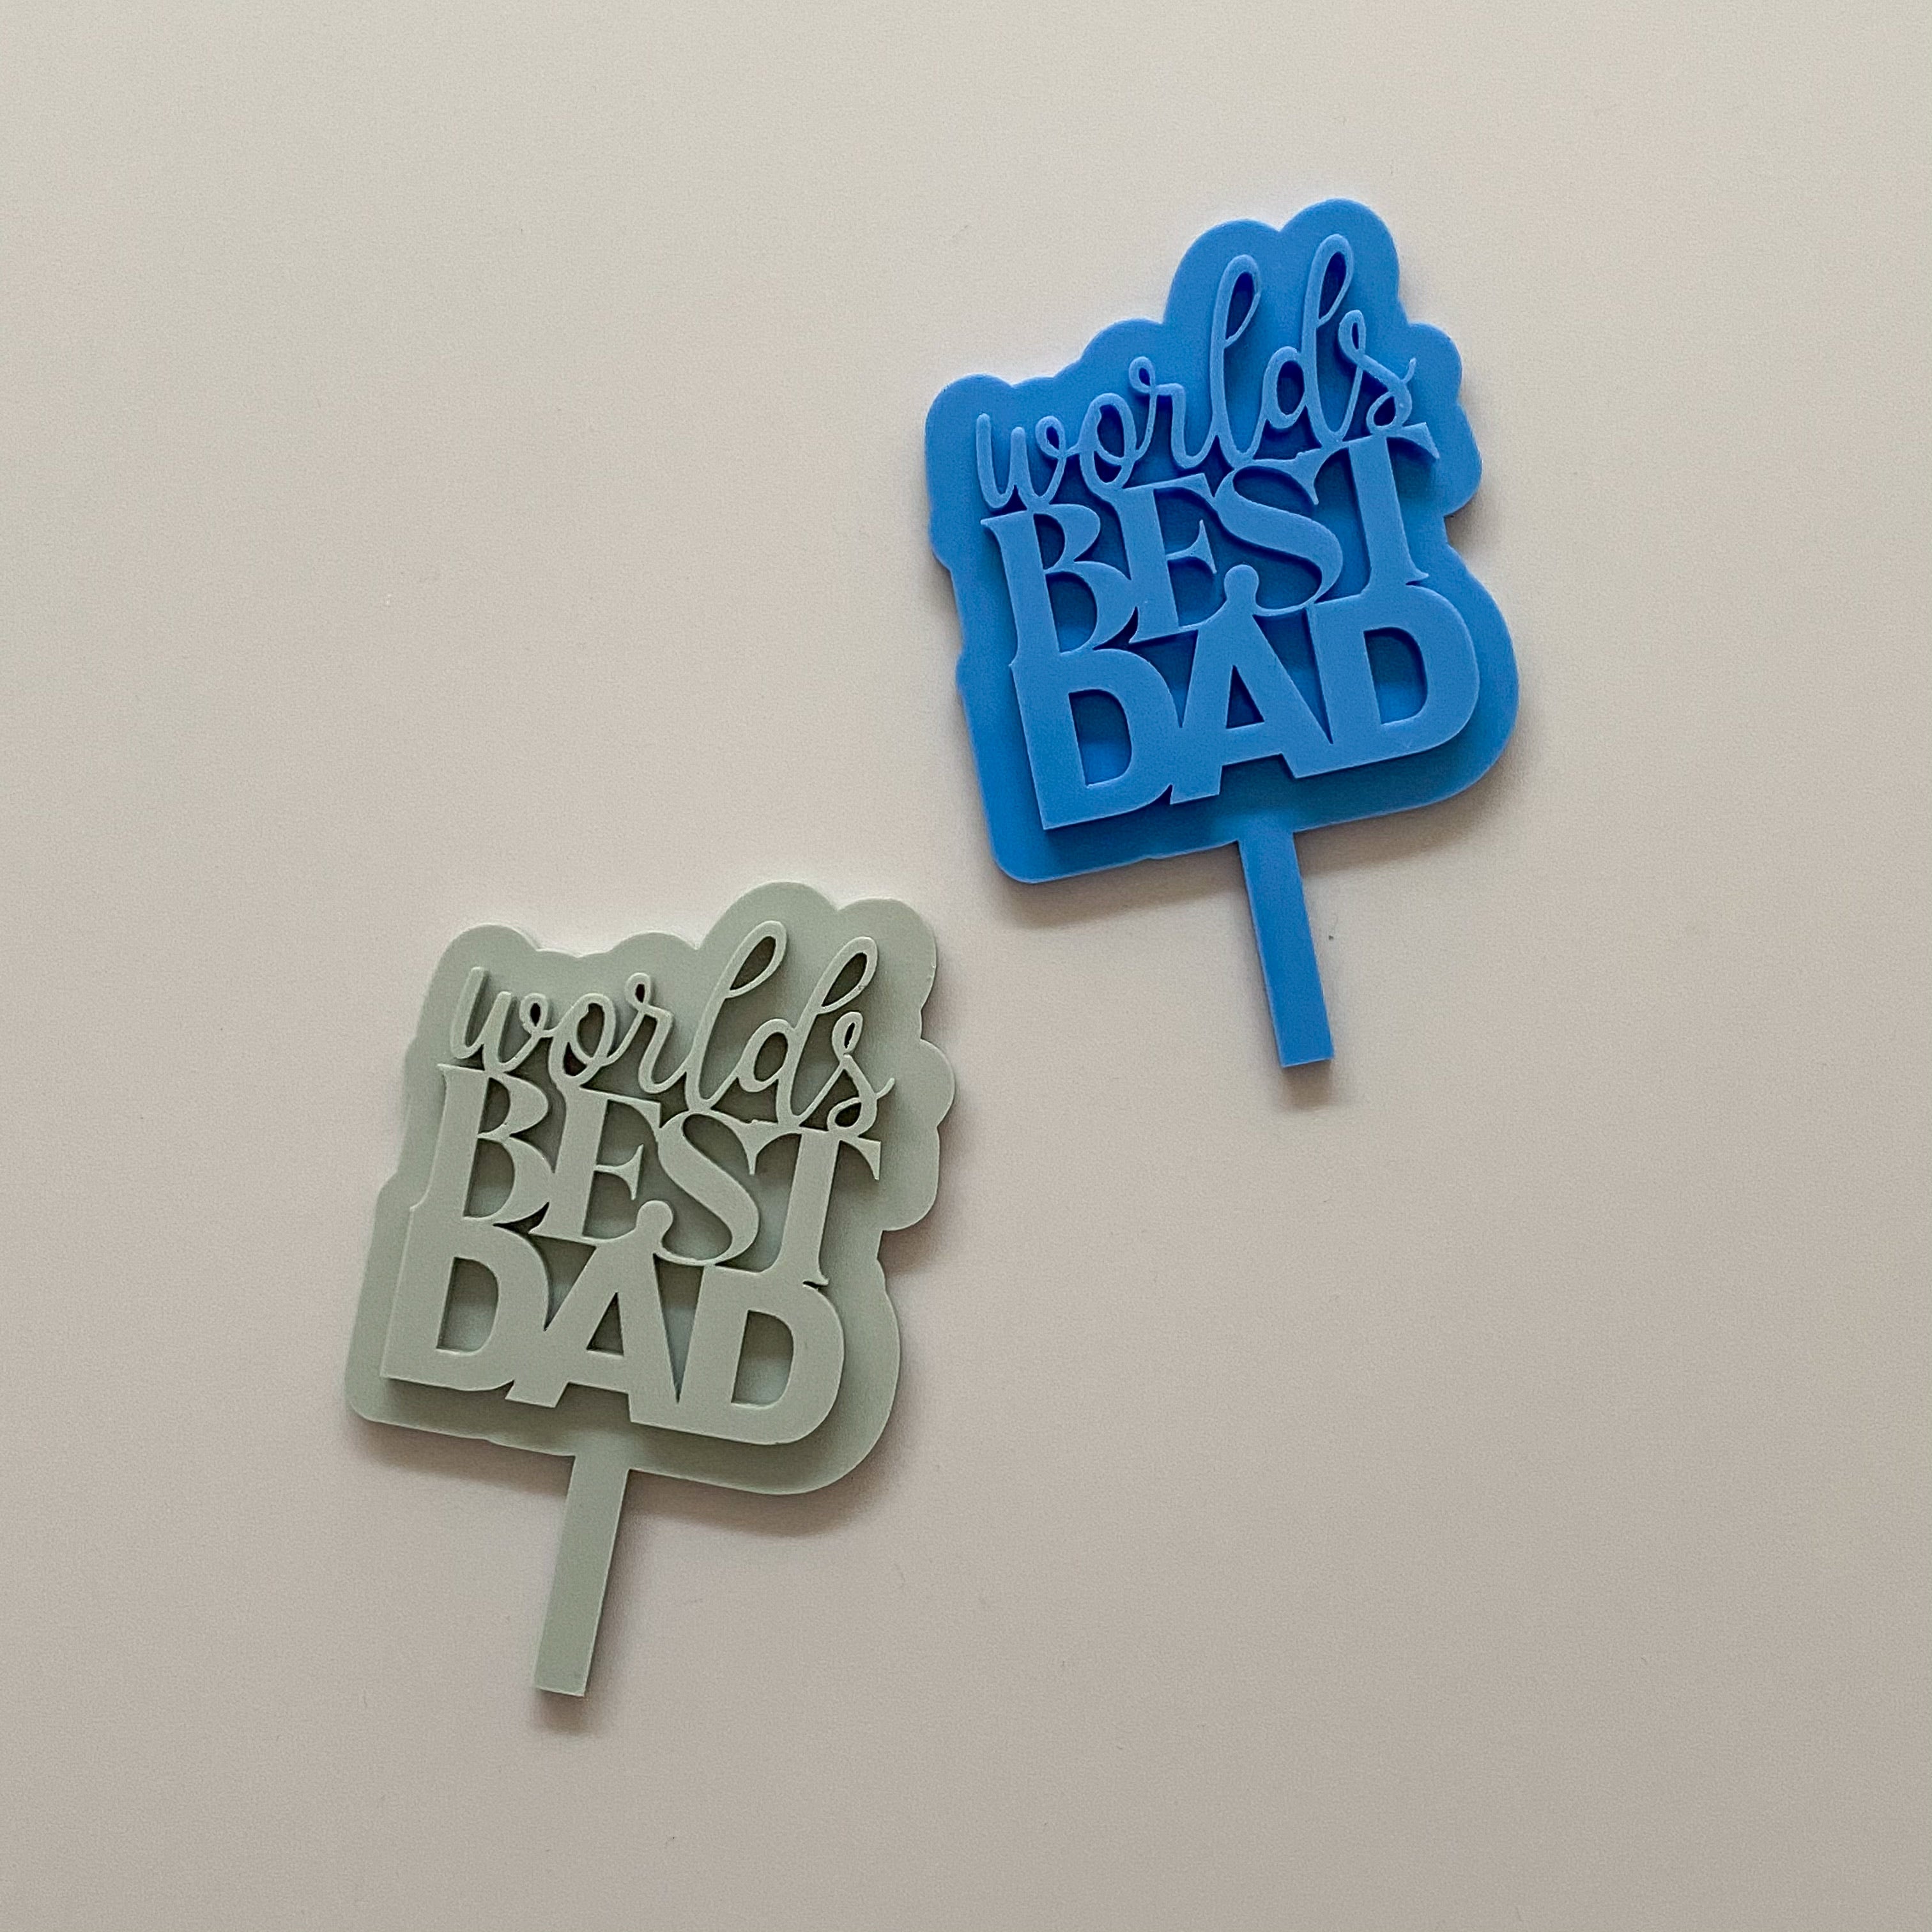 Worlds Best Dad - Mini Cupcake Topper (Double Layered)